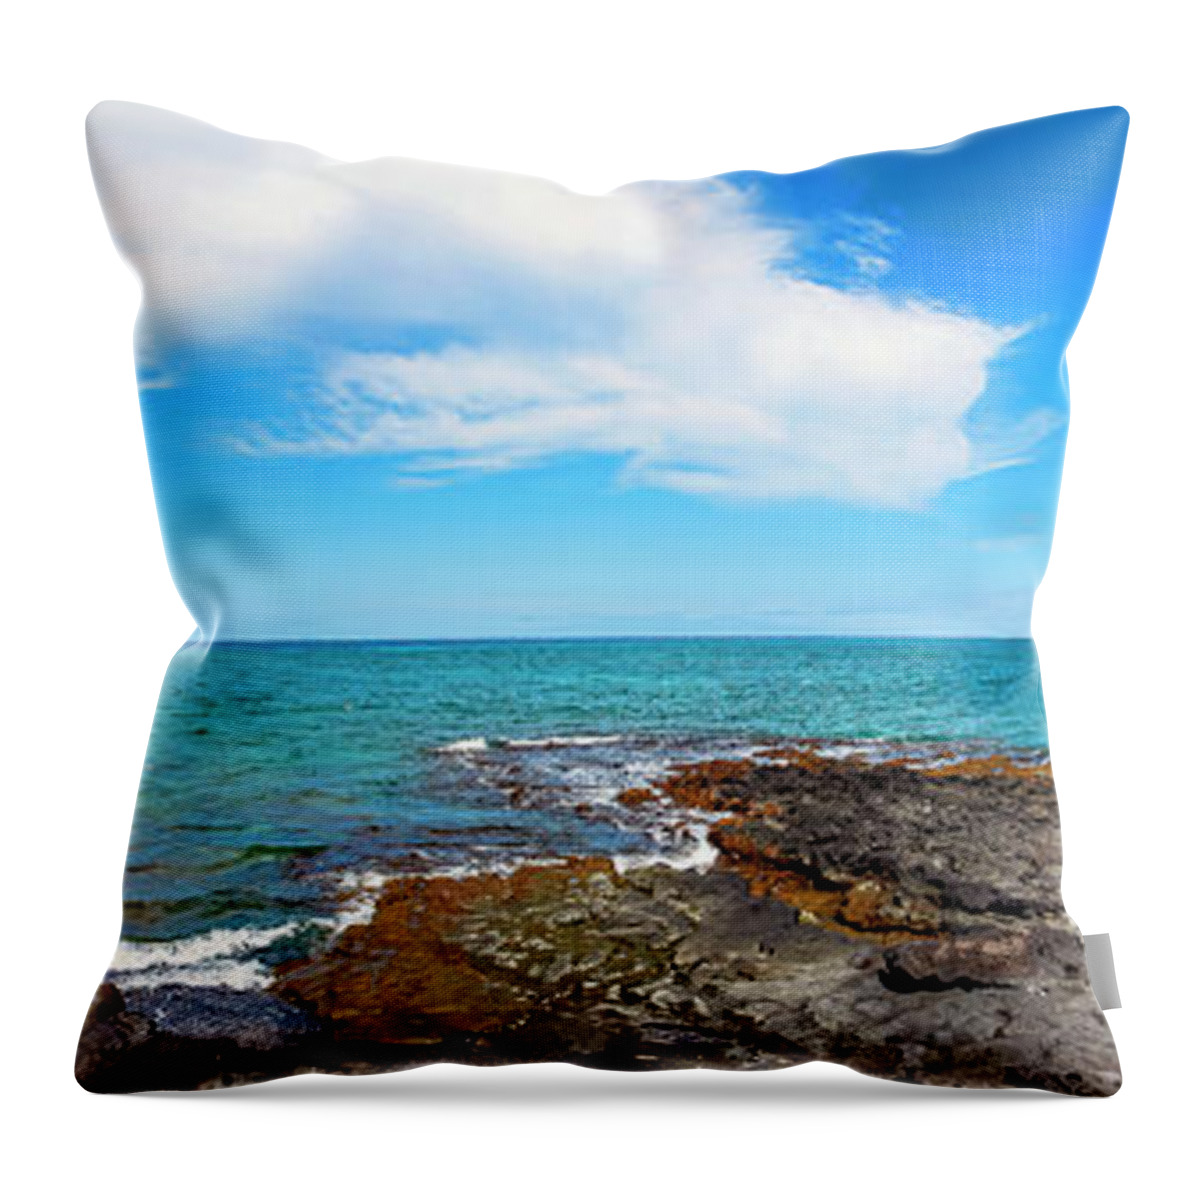 Kiholo Bay Throw Pillow featuring the photograph Kiholo Bay Panoramic by Anthony Jones